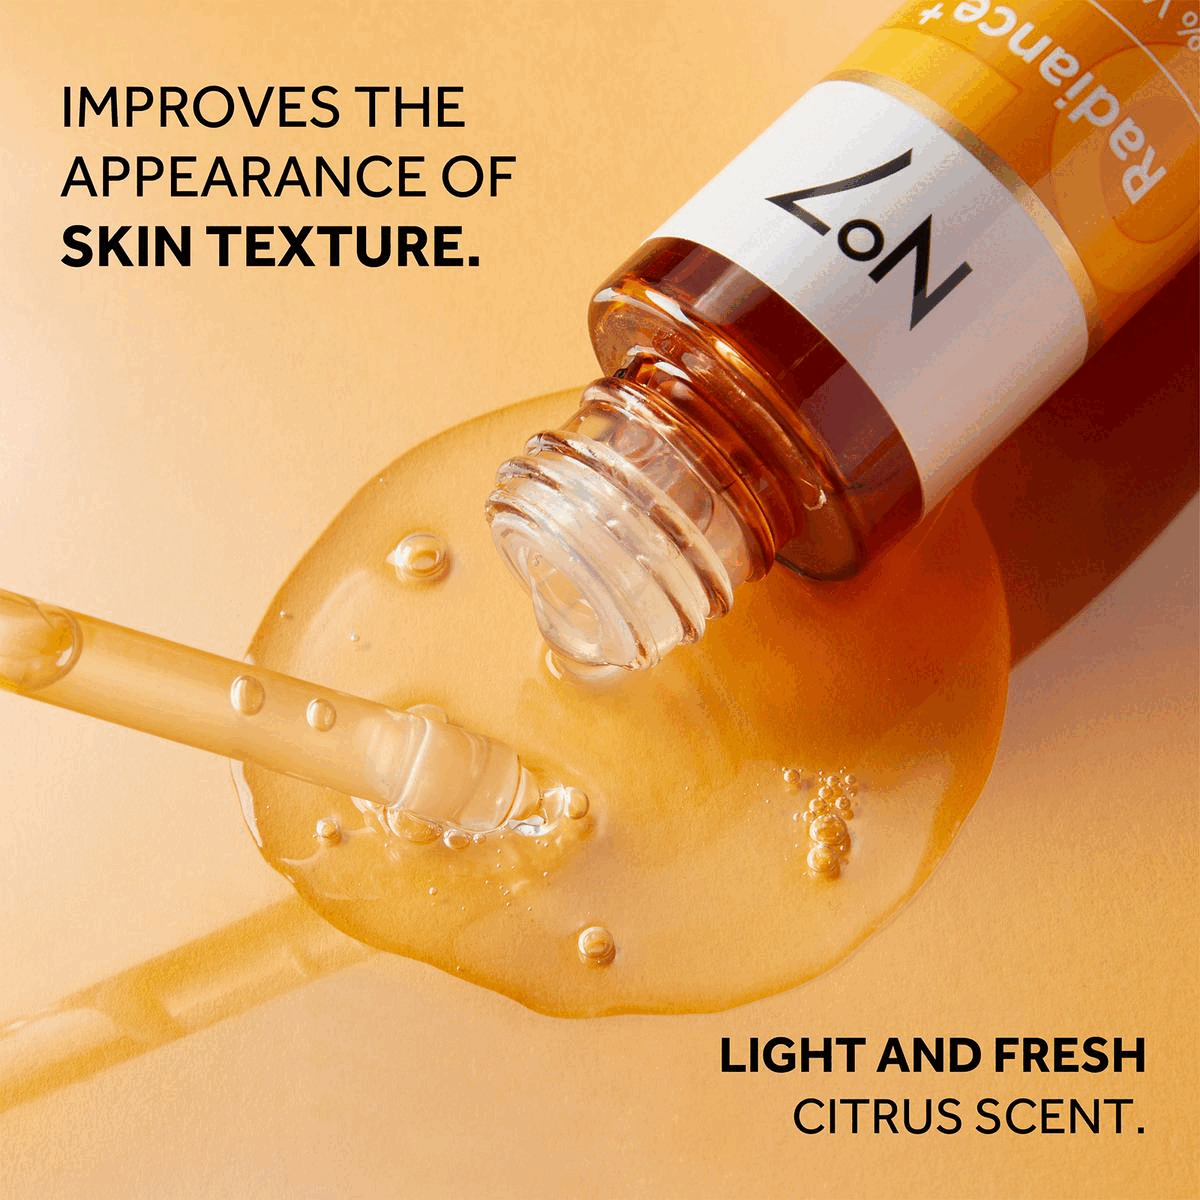 Image 1: Improves The Appearance Of Skin Texture. Light And Fresh Citrus Scent. Image 2: Use Once Per Day, Either Morning Or Evening. 1 After Cleansing And Toning, Place 3-4 Drops In Your Palm. 2 Apply To Face And Neck Using Fingertips, Avoiding The Eye And Lip Area. 3 Follow With Radiance+ Vitamin C Daily Brightening Moisturizer Image 3: I Love, Love, Love This Vitamin C Serum. My Skin Is Permanently Radiant.